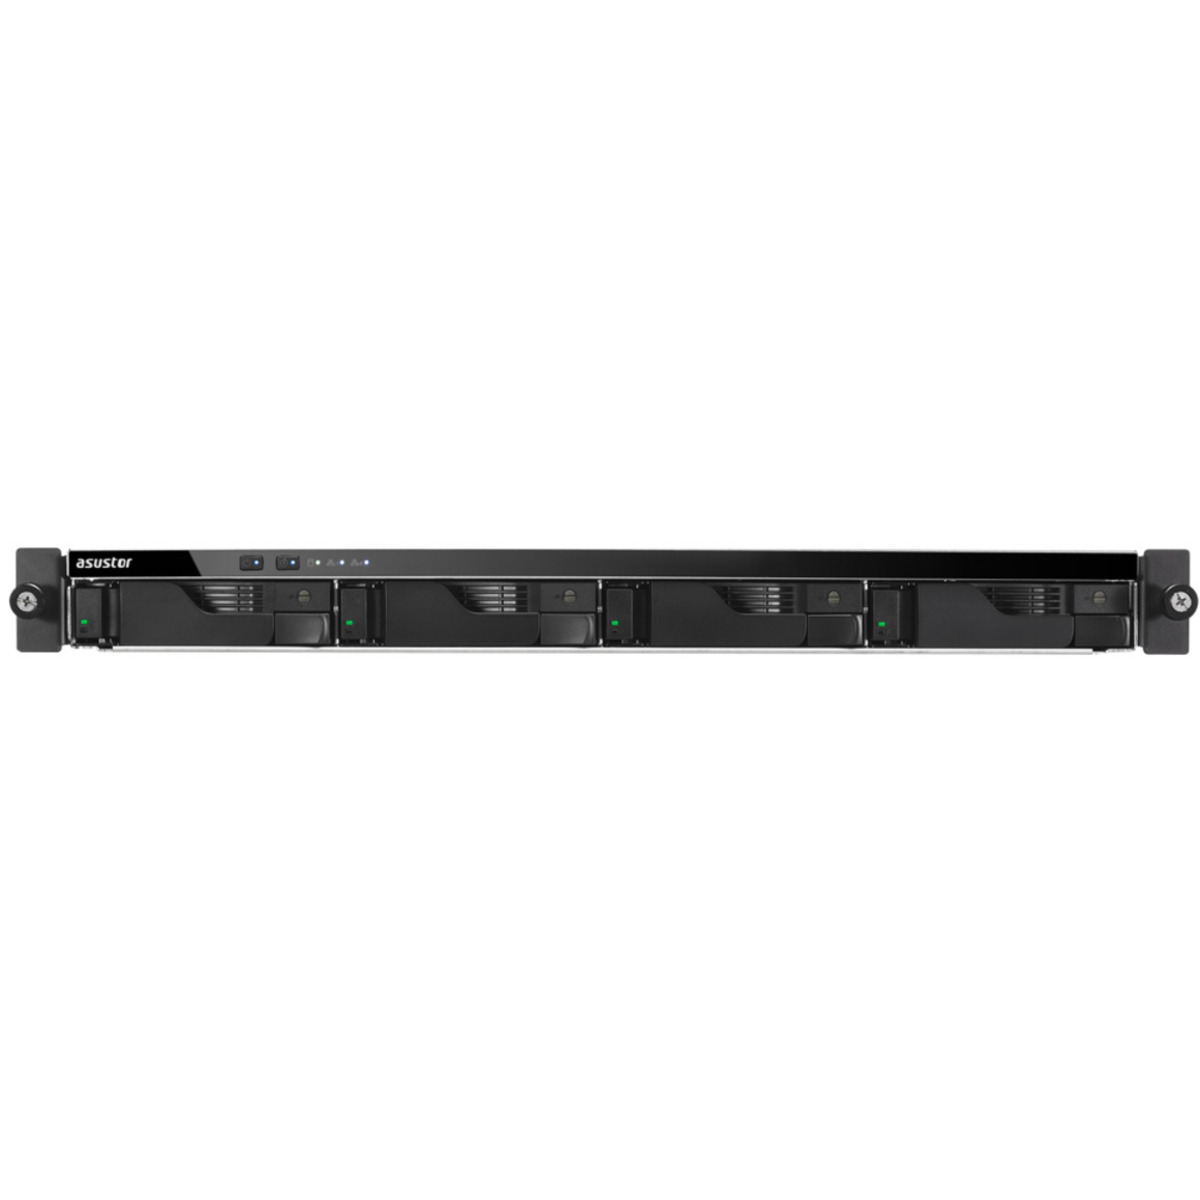 ASUSTOR LOCKERSTOR 4RD AS6504RD 36tb 4-Bay RackMount Multimedia / Power User / Business NAS - Network Attached Storage Device 2x18tb Seagate IronWolf Pro ST18000NT001 3.5 7200rpm SATA 6Gb/s HDD NAS Class Drives Installed - Burn-In Tested - FREE RAM UPGRADE LOCKERSTOR 4RD AS6504RD